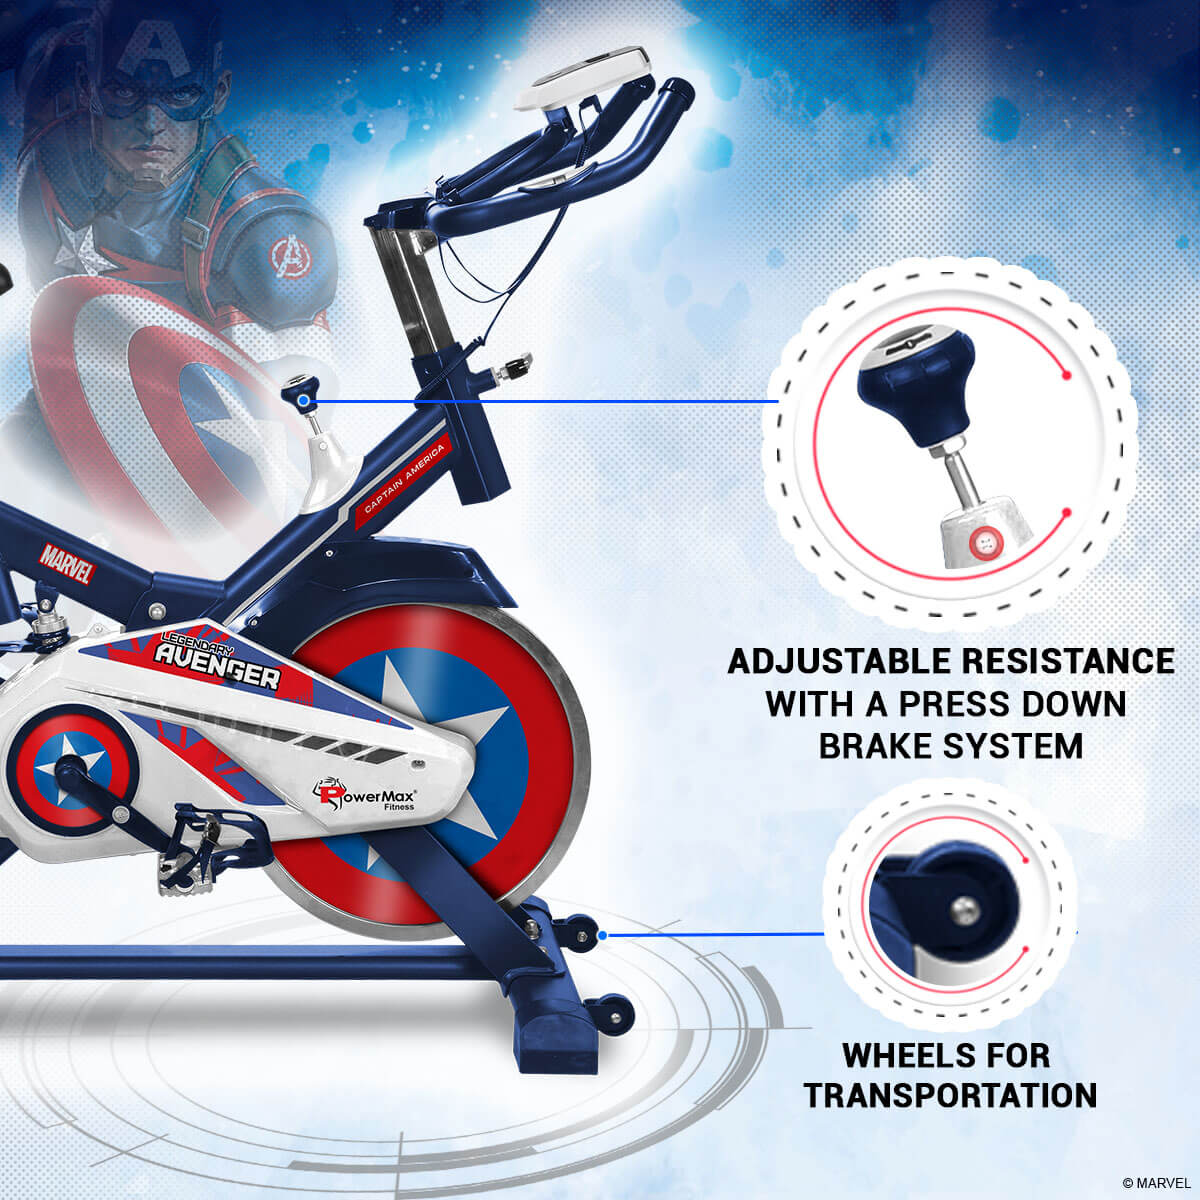 buy powermax x marvel mb-165 exercise spin bike for home use